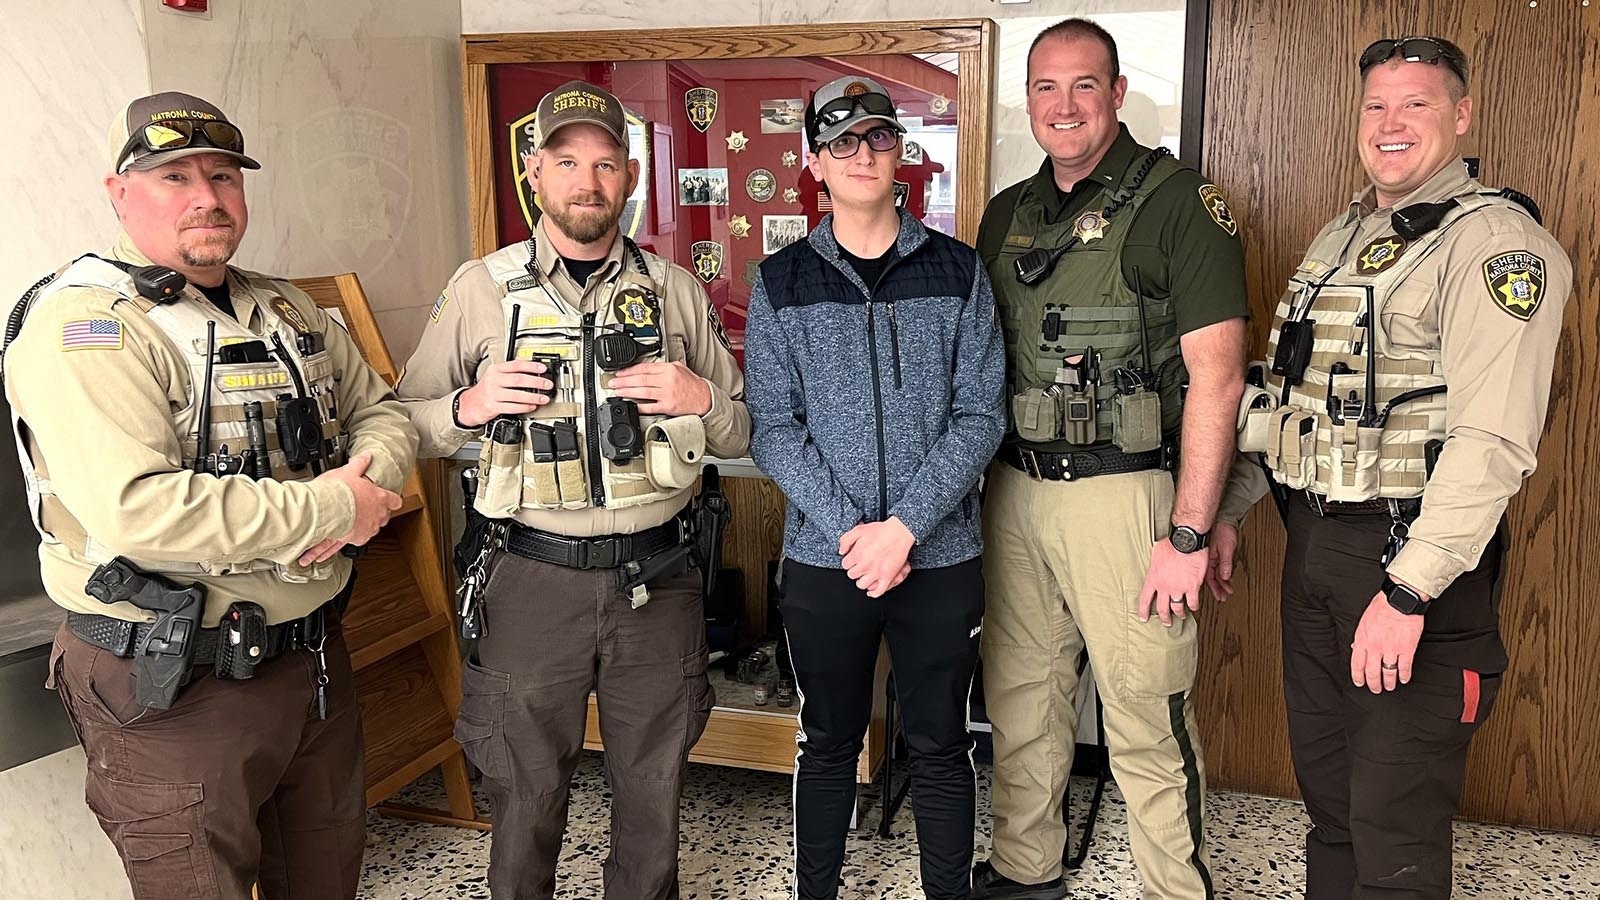 Gavan Bethel, center, recently visited the Natrona County Sheriff’s Department to thank first responders involved in saving his life last May. They include from left, Deputy Chris Mikels, Sergeant Brad Legler, Wyoming Highway Patrol Lieutenant Clint Christensen, and Deputy Dan Beall.